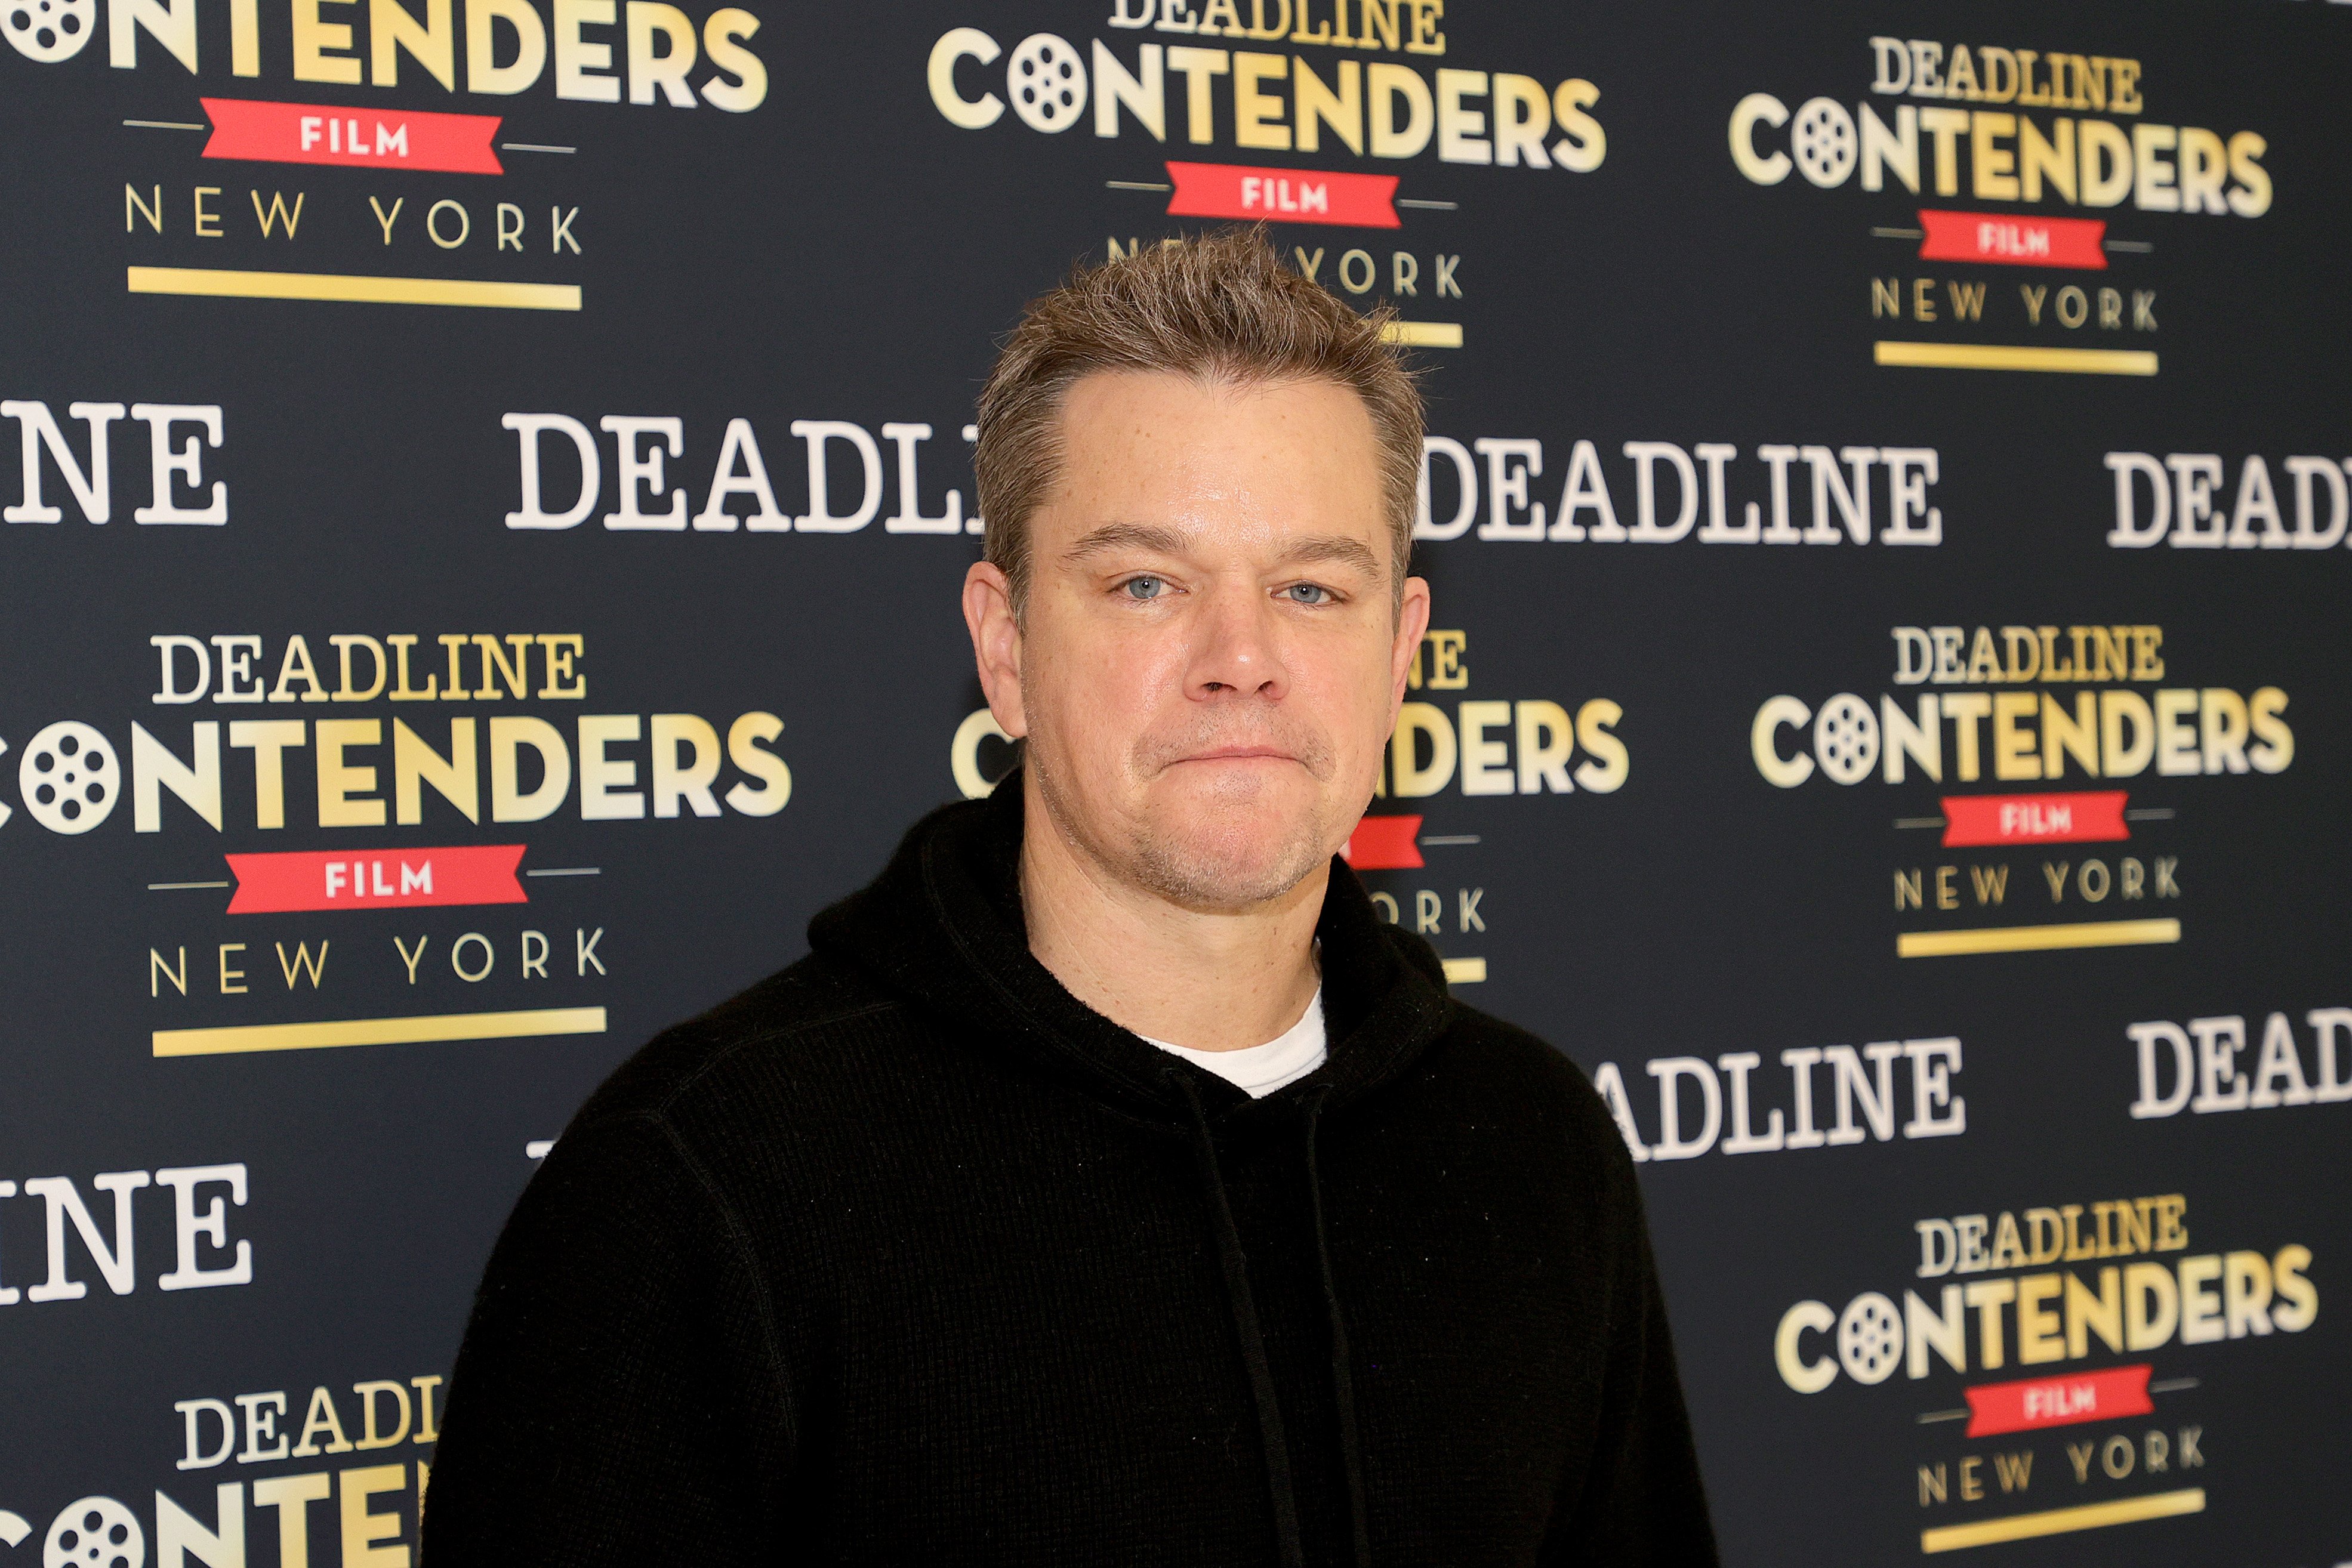 Actor Matt Damon on stage during Focus Features' "Stillwater" panel at the Deadline Contenders Film: New York on December 04, 2021 in New York City. | Source: Getty Images 